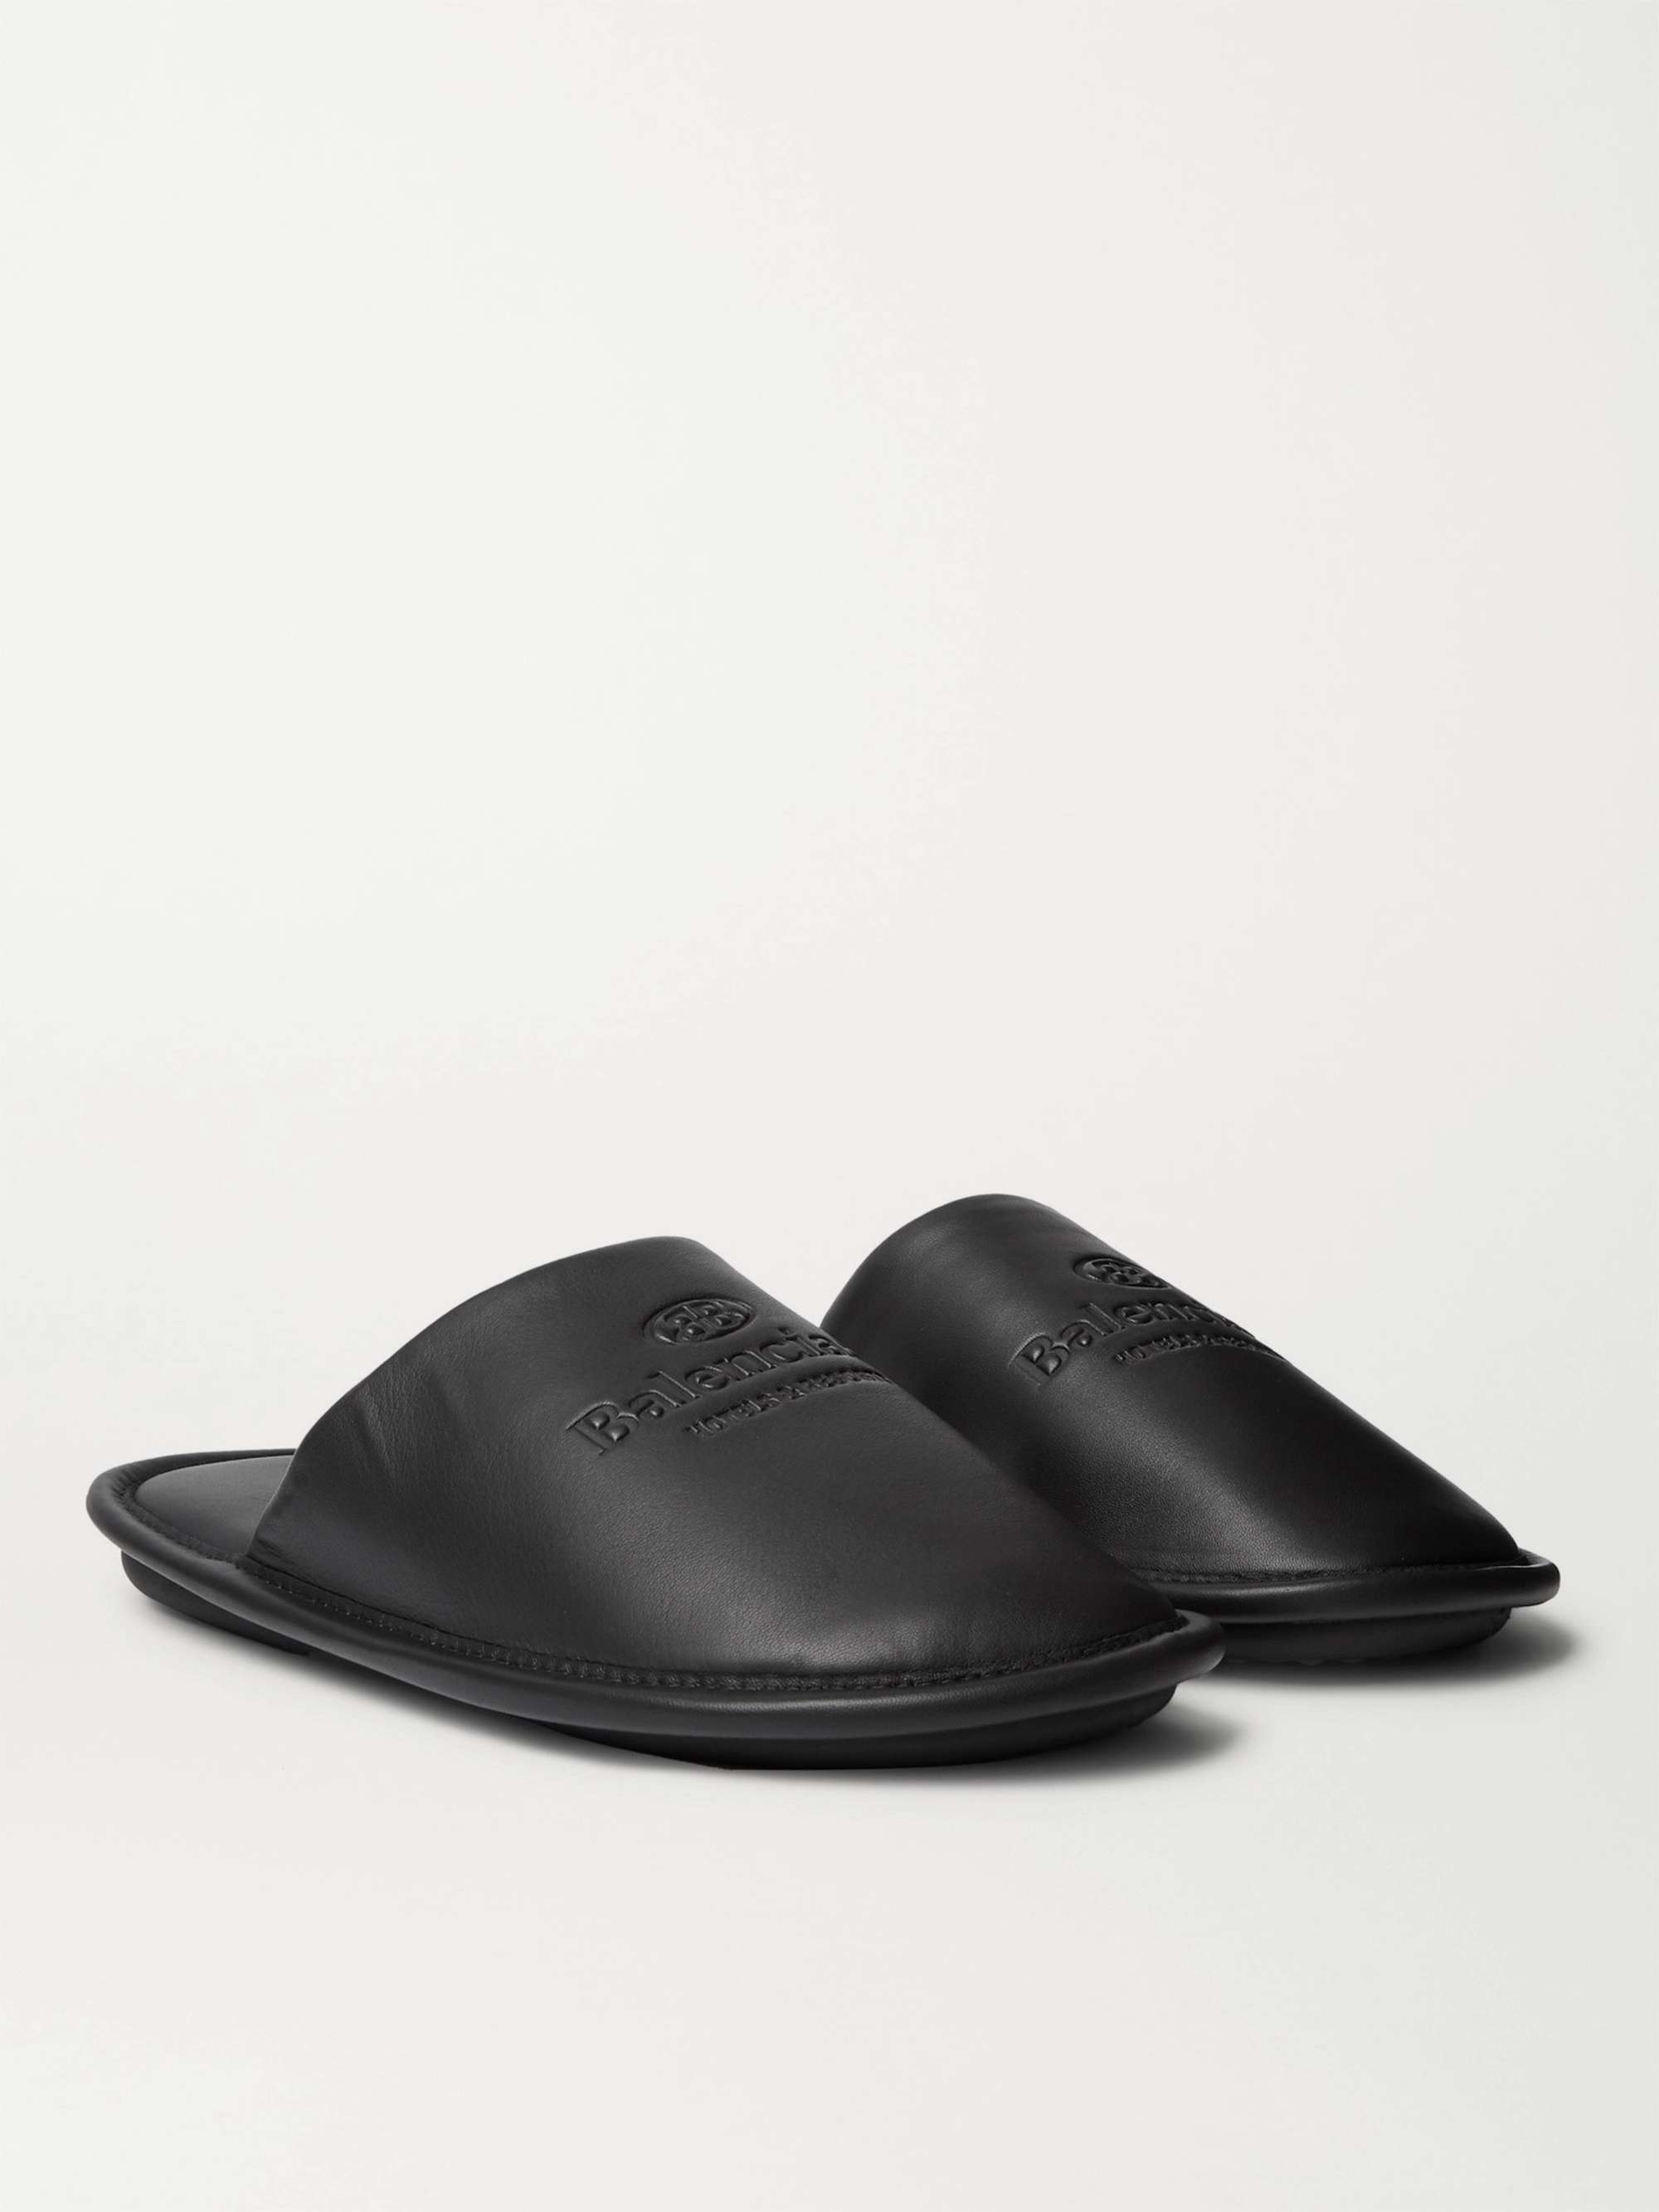 BALENCIAGA Home Logo-Debossed Leather Slippers